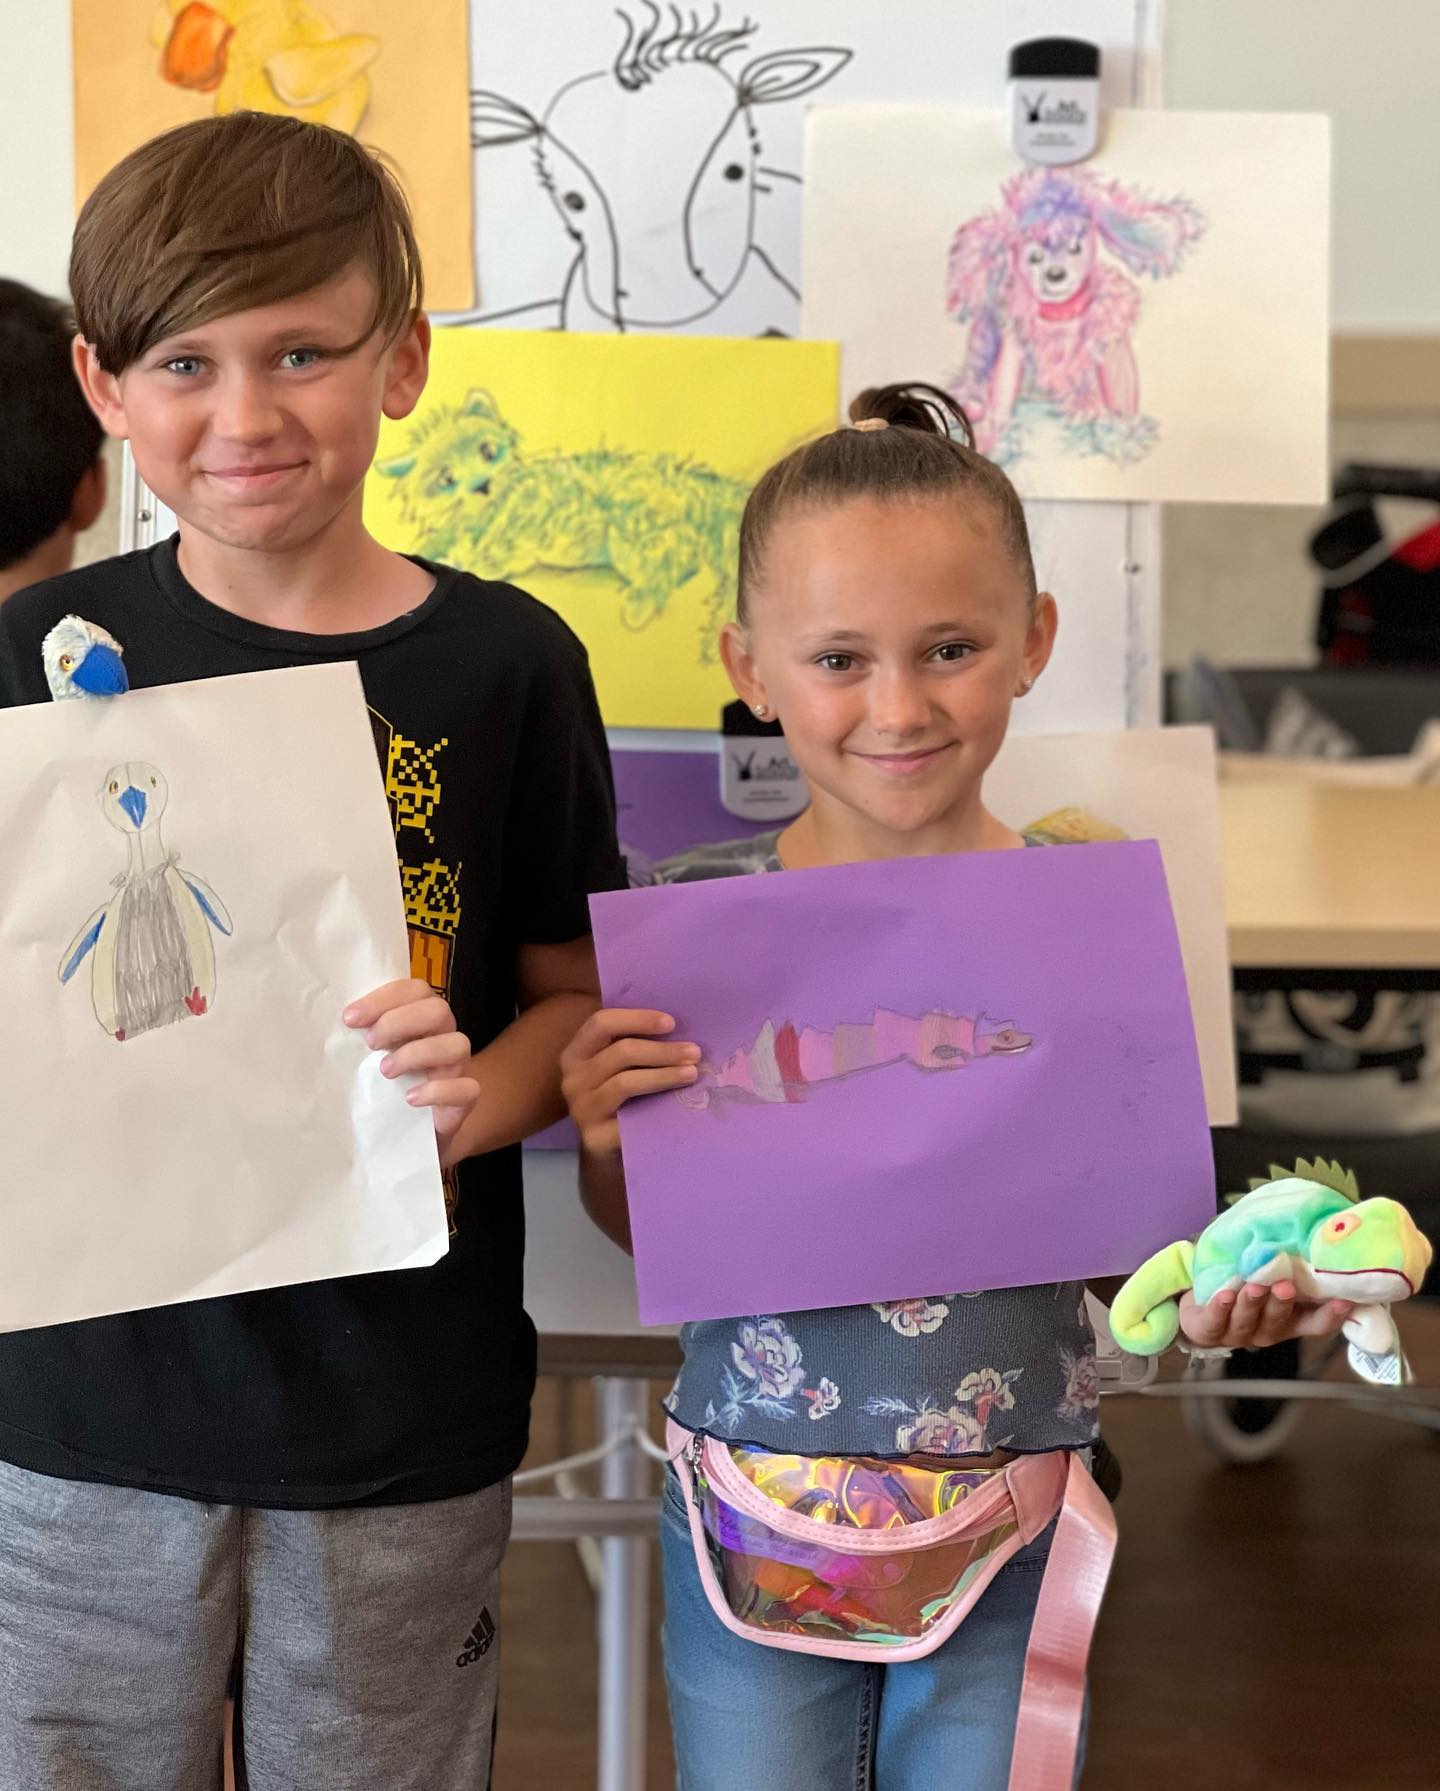 Two children holding a Beanie Baby and their artwork